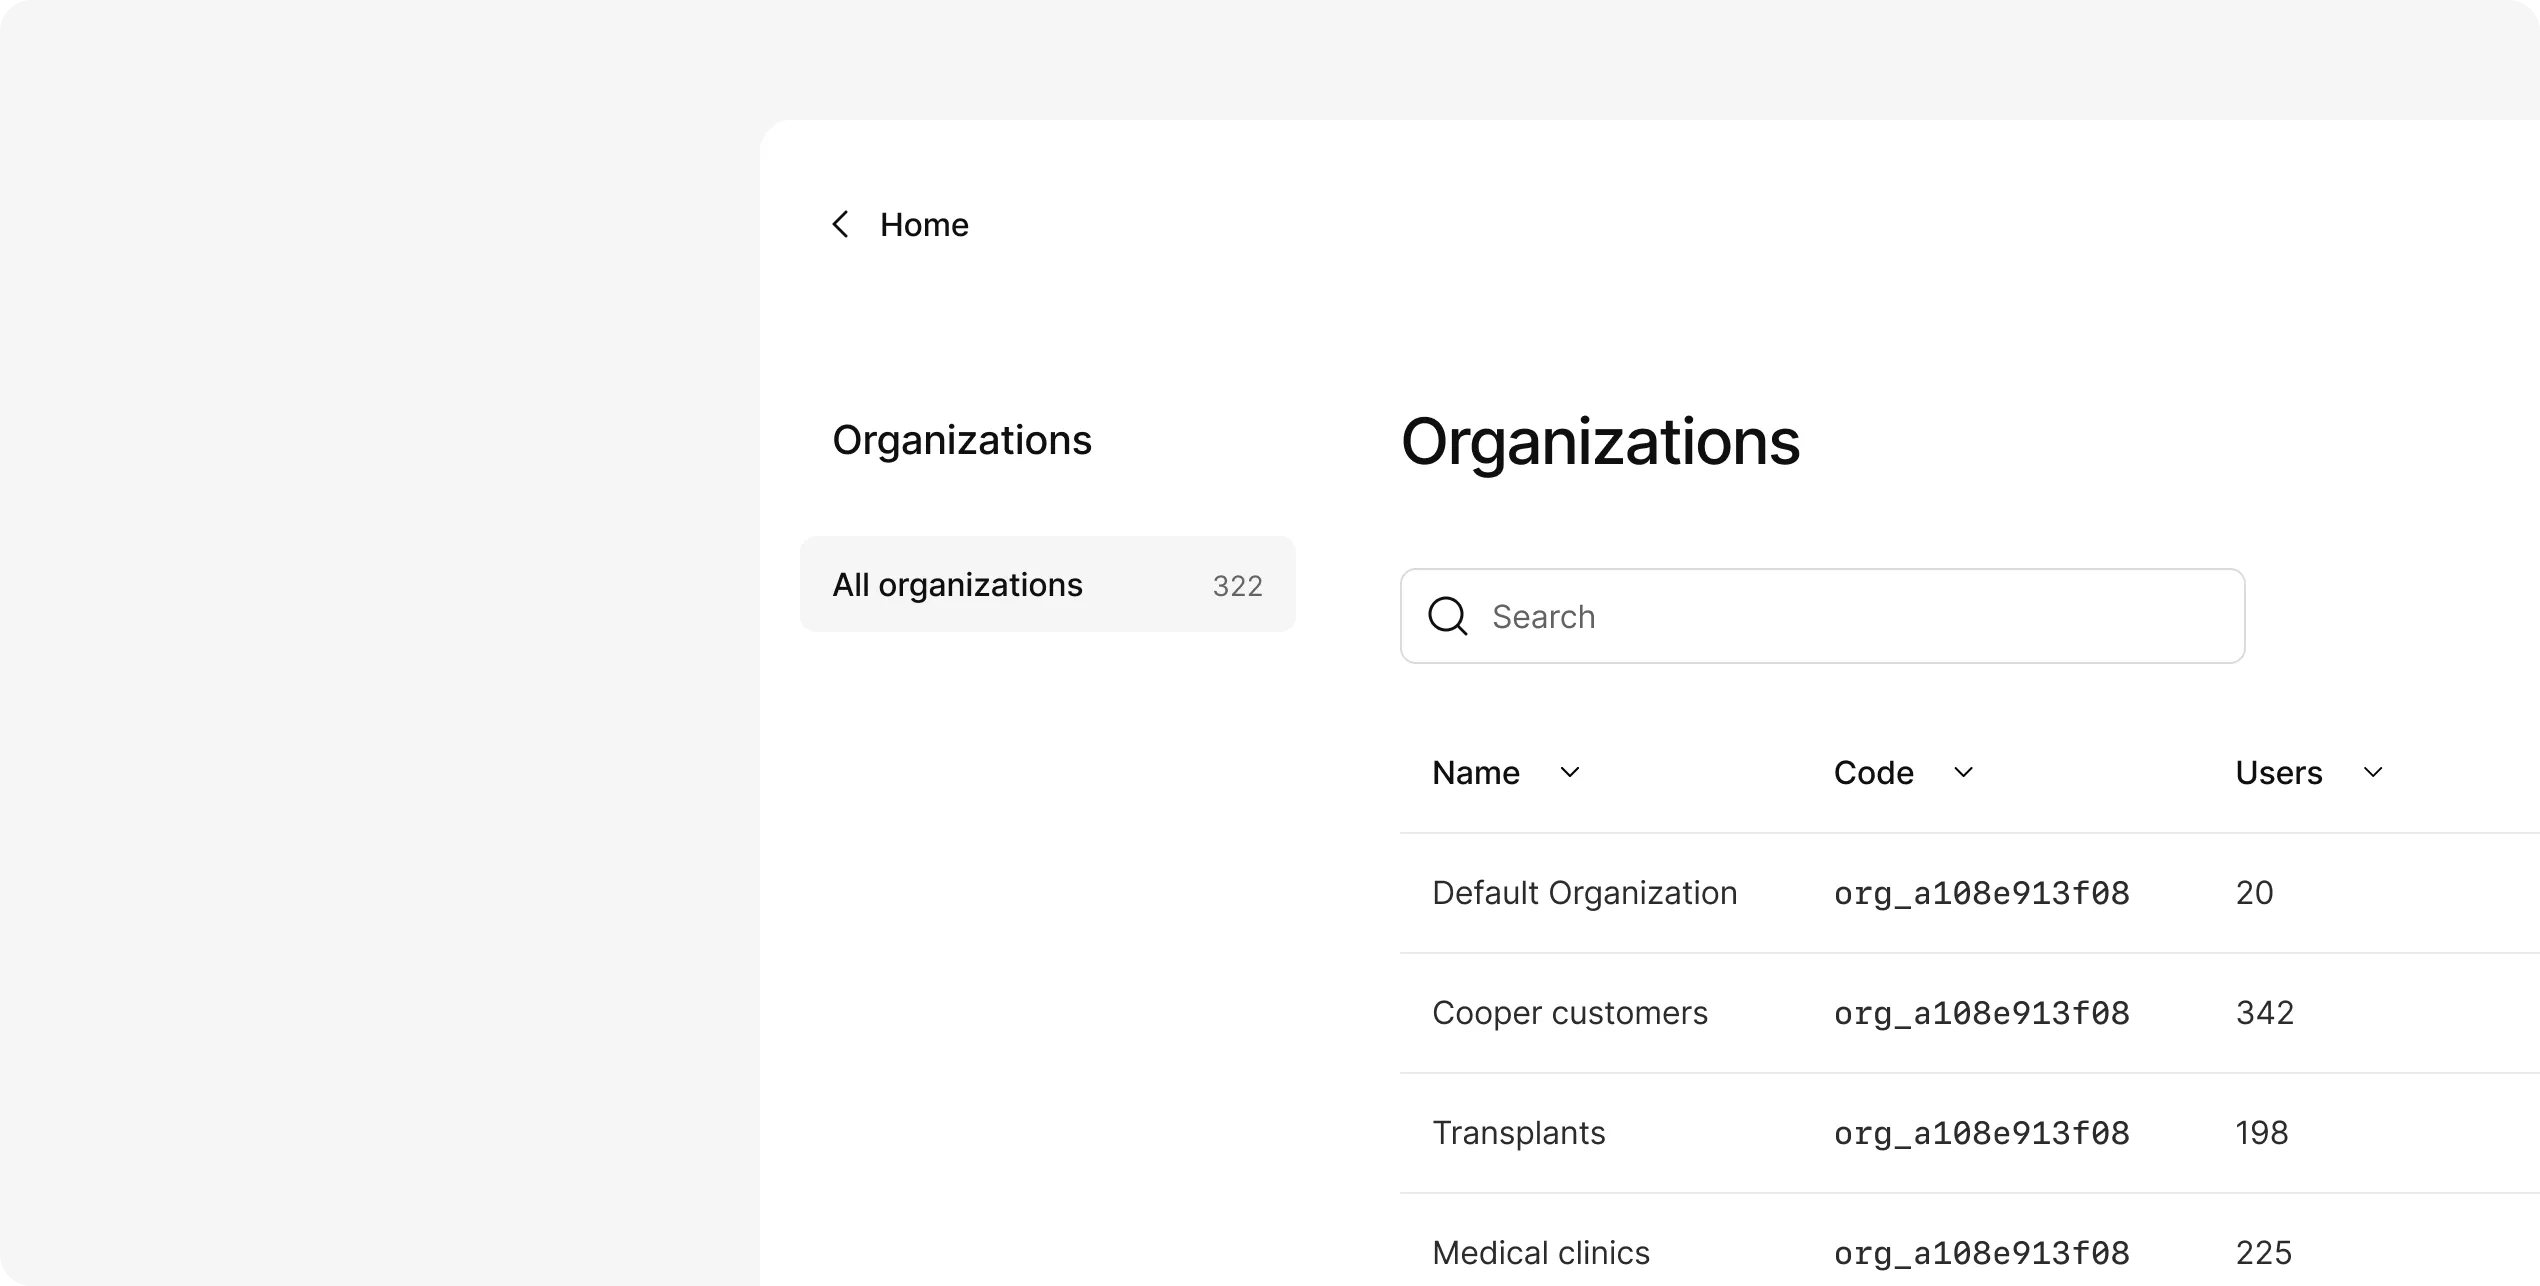 Image showing the Organizations dashboard in Kinde